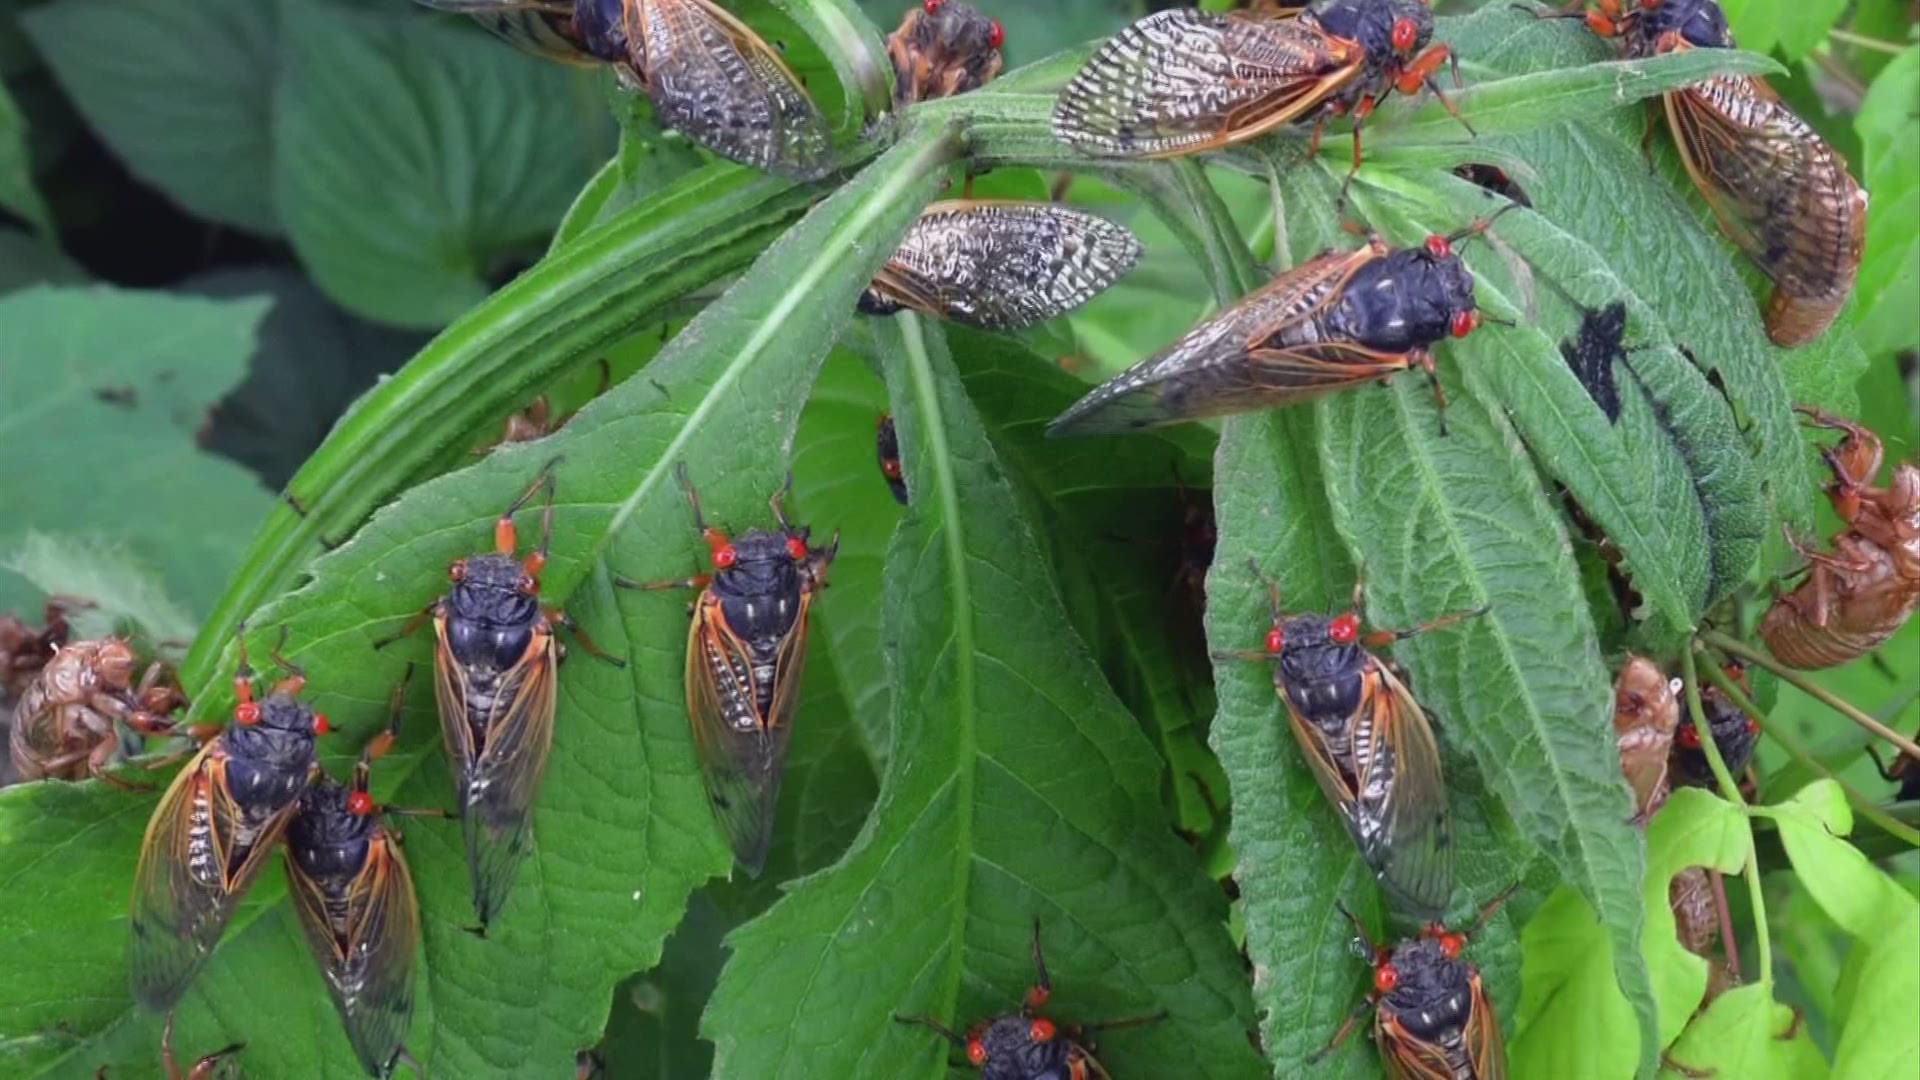 Experts are expecting one of the largest outbreaks of cicadas to arrive in Columbus.